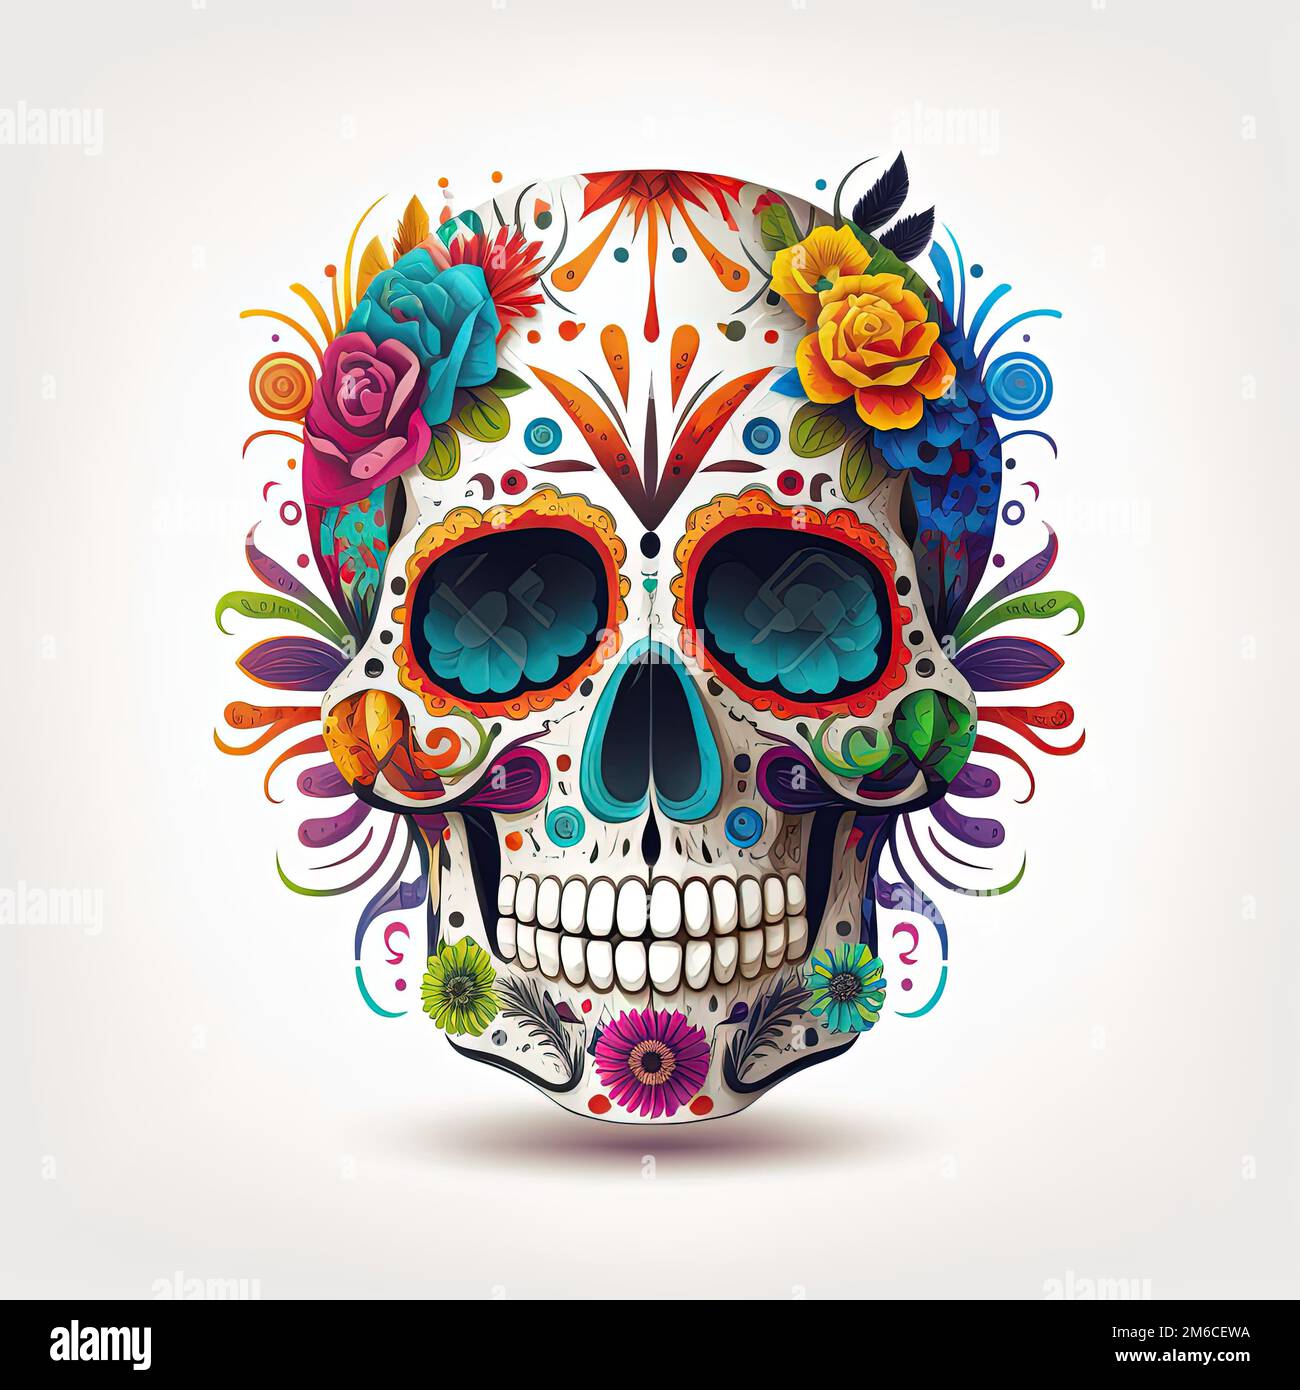 Calavera (Mexican Sugar skull), isolated on white background, colorful, floral skull for dia de los muertos (Day of the Dead) Stock Photo